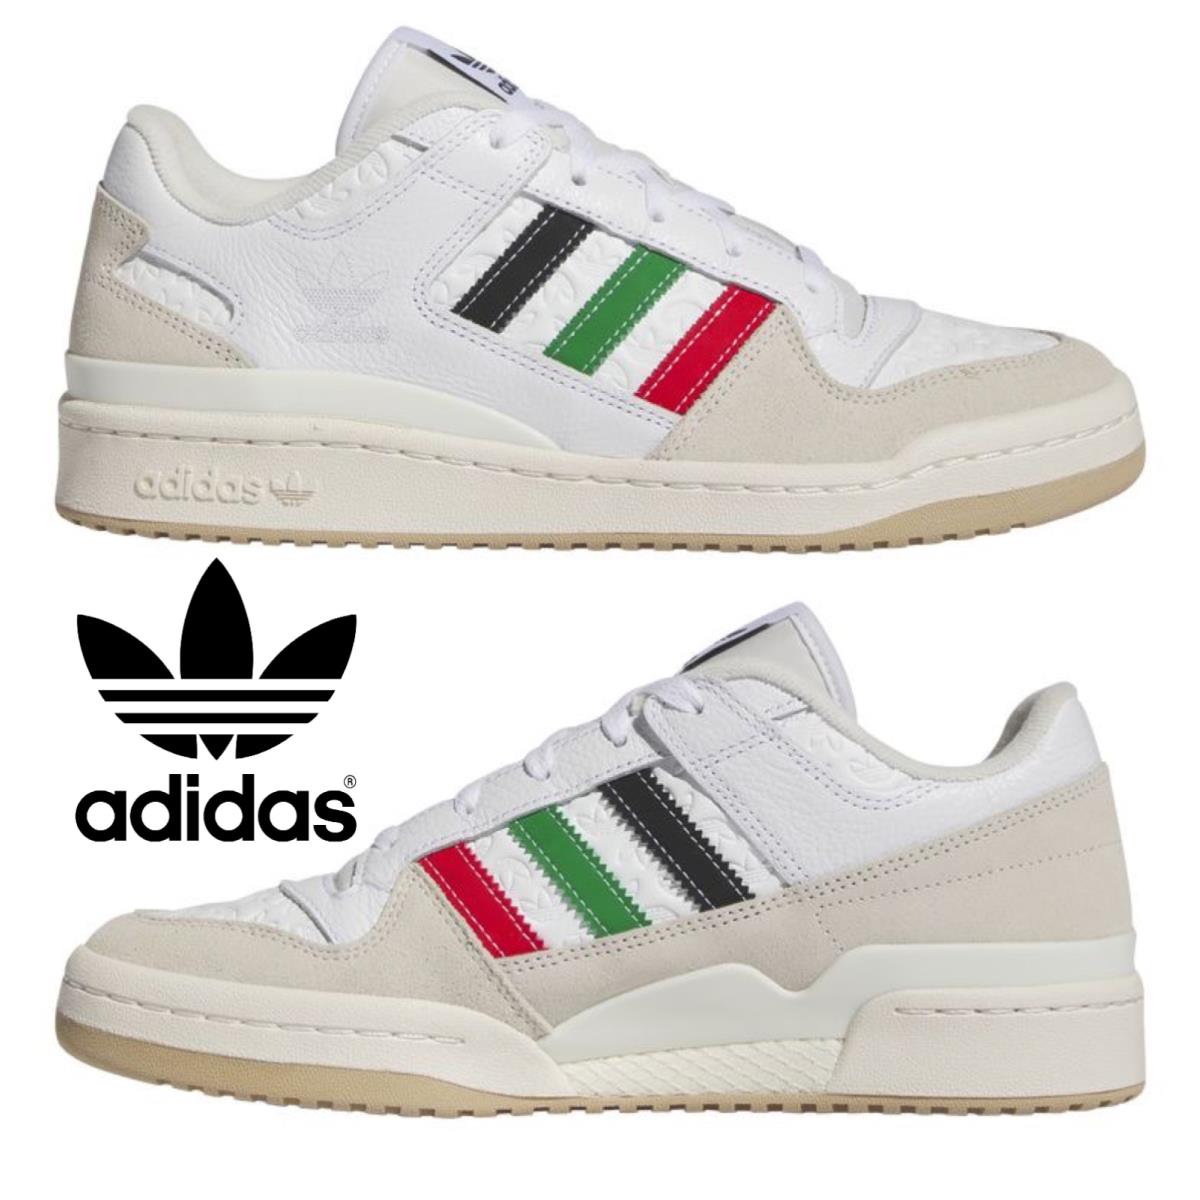 Adidas Originals Forum Low CL Men`s Sneakers Comfort Sport Casual Shoes White - White , Green/White/Red Manufacturer